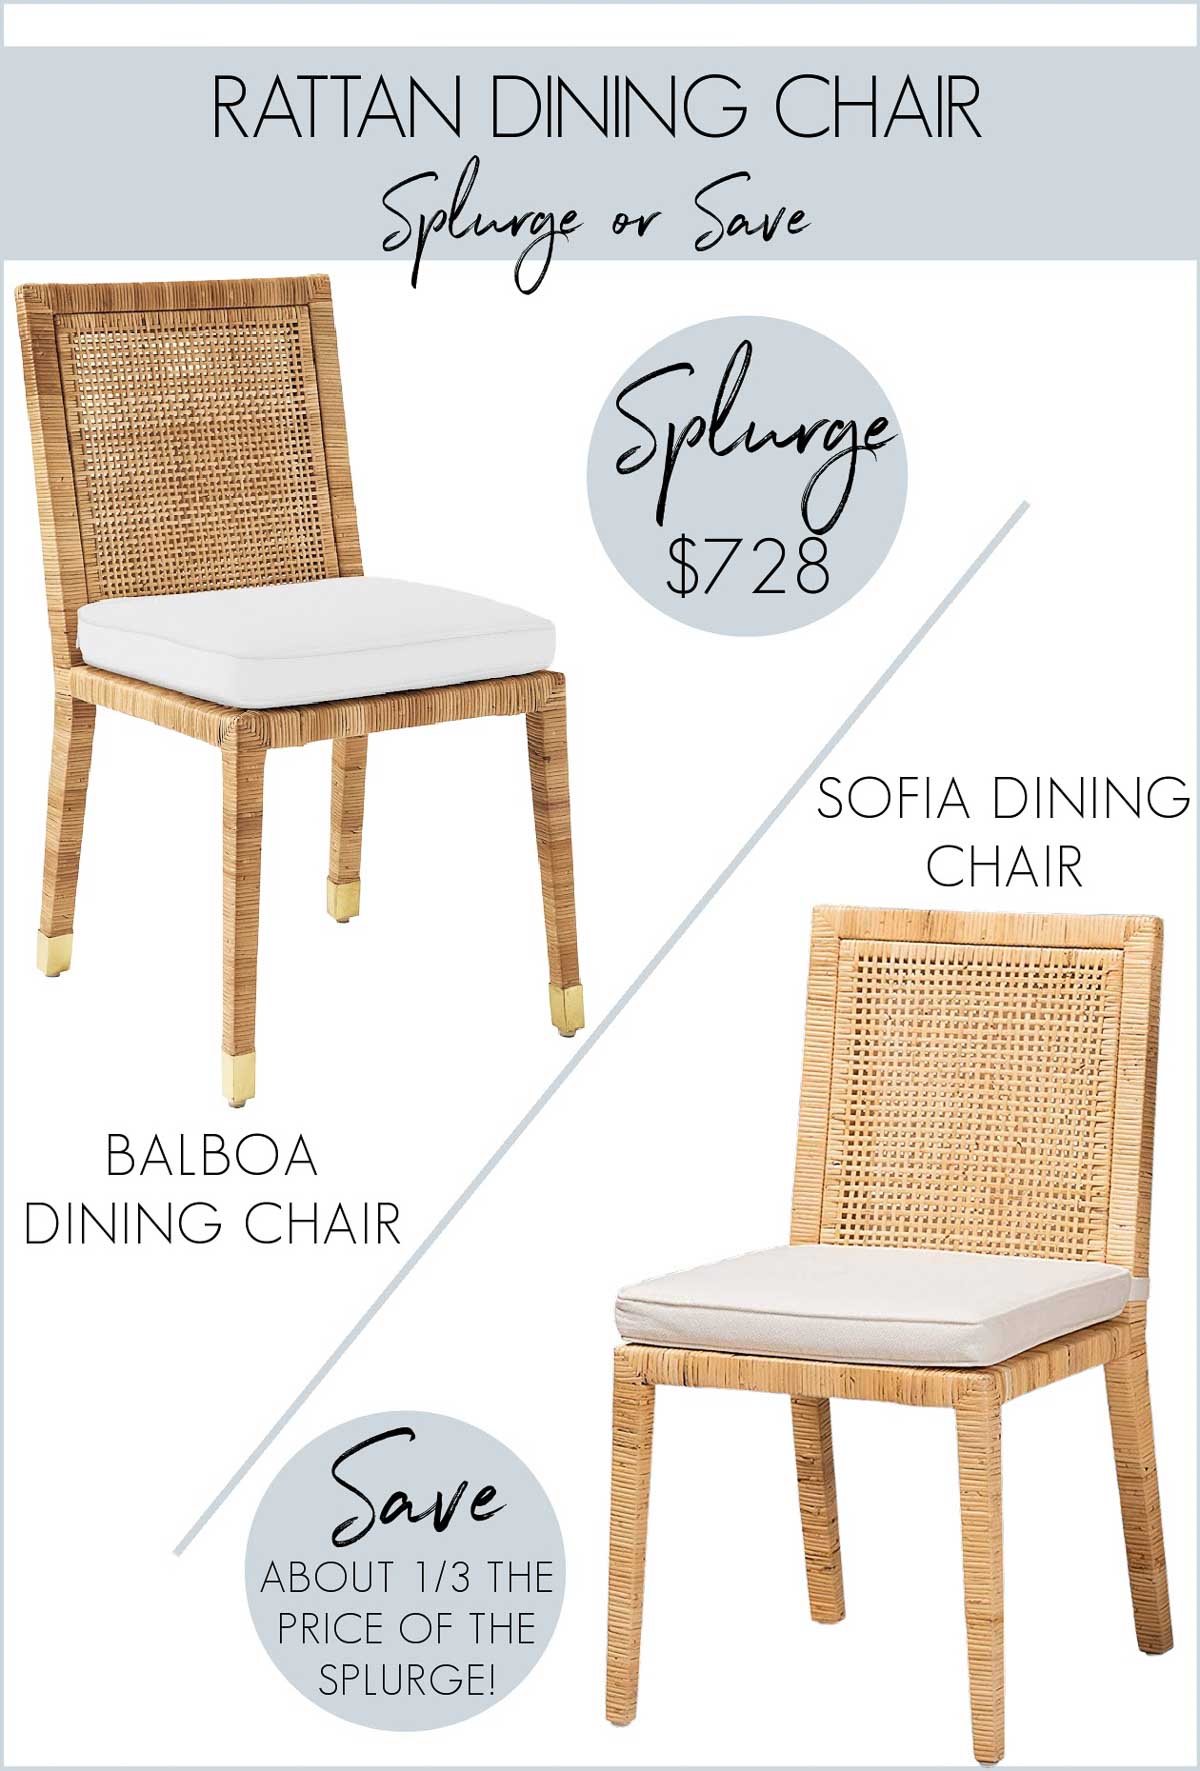 Serena & Lily rattan dining chair look for less - a favorite cheap home decor find!